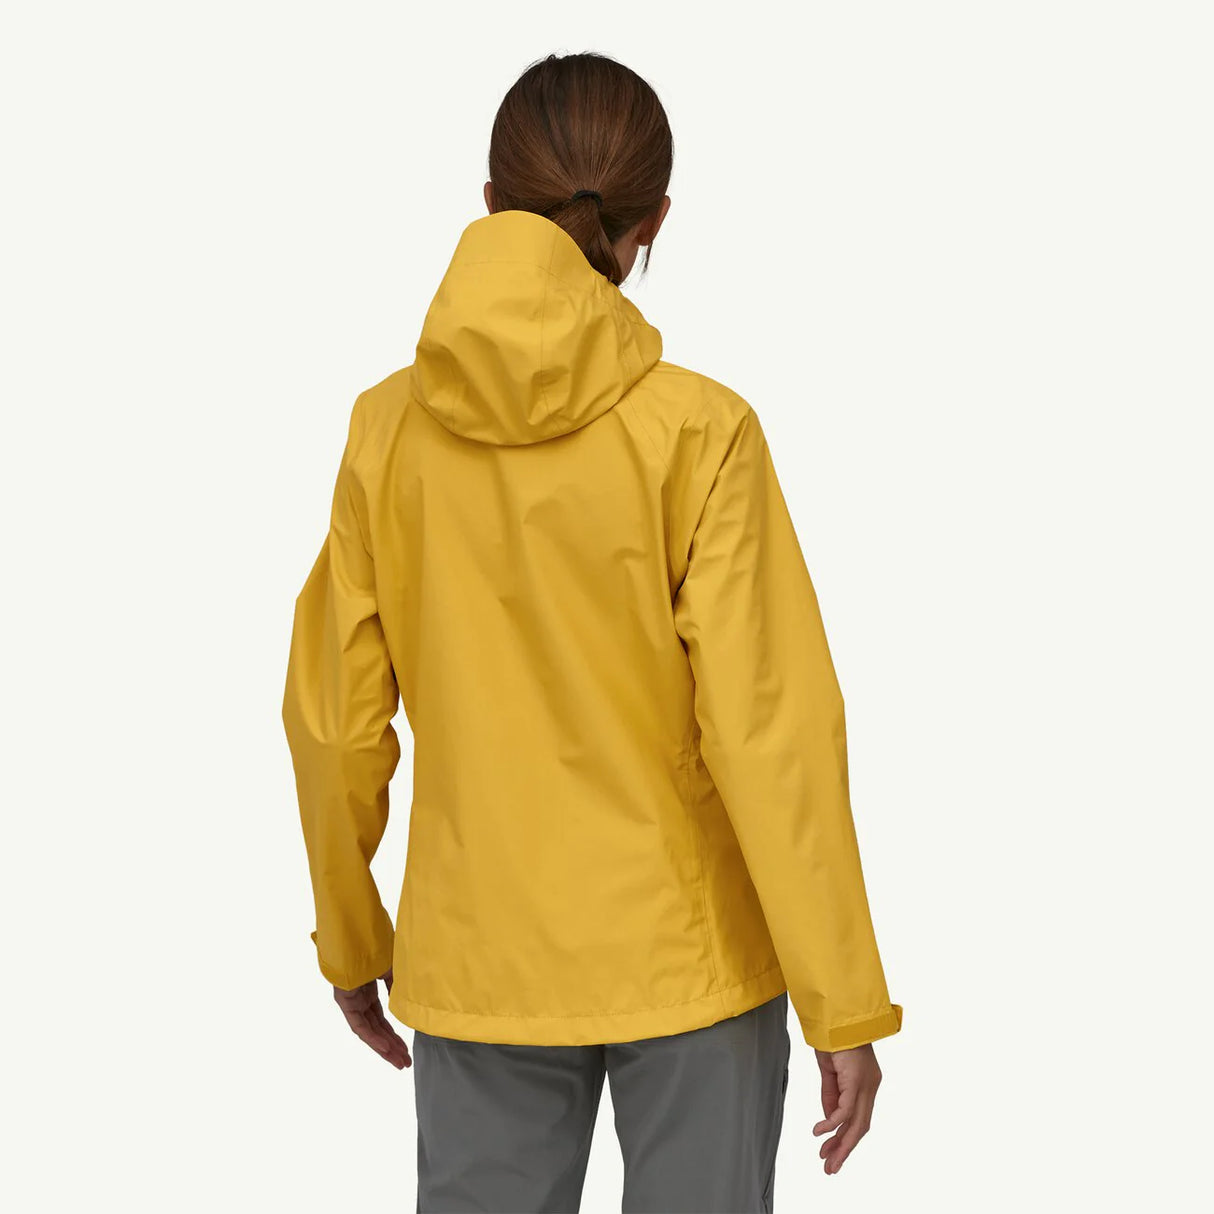 Surf trip A-Div - Packable Poncho for Women